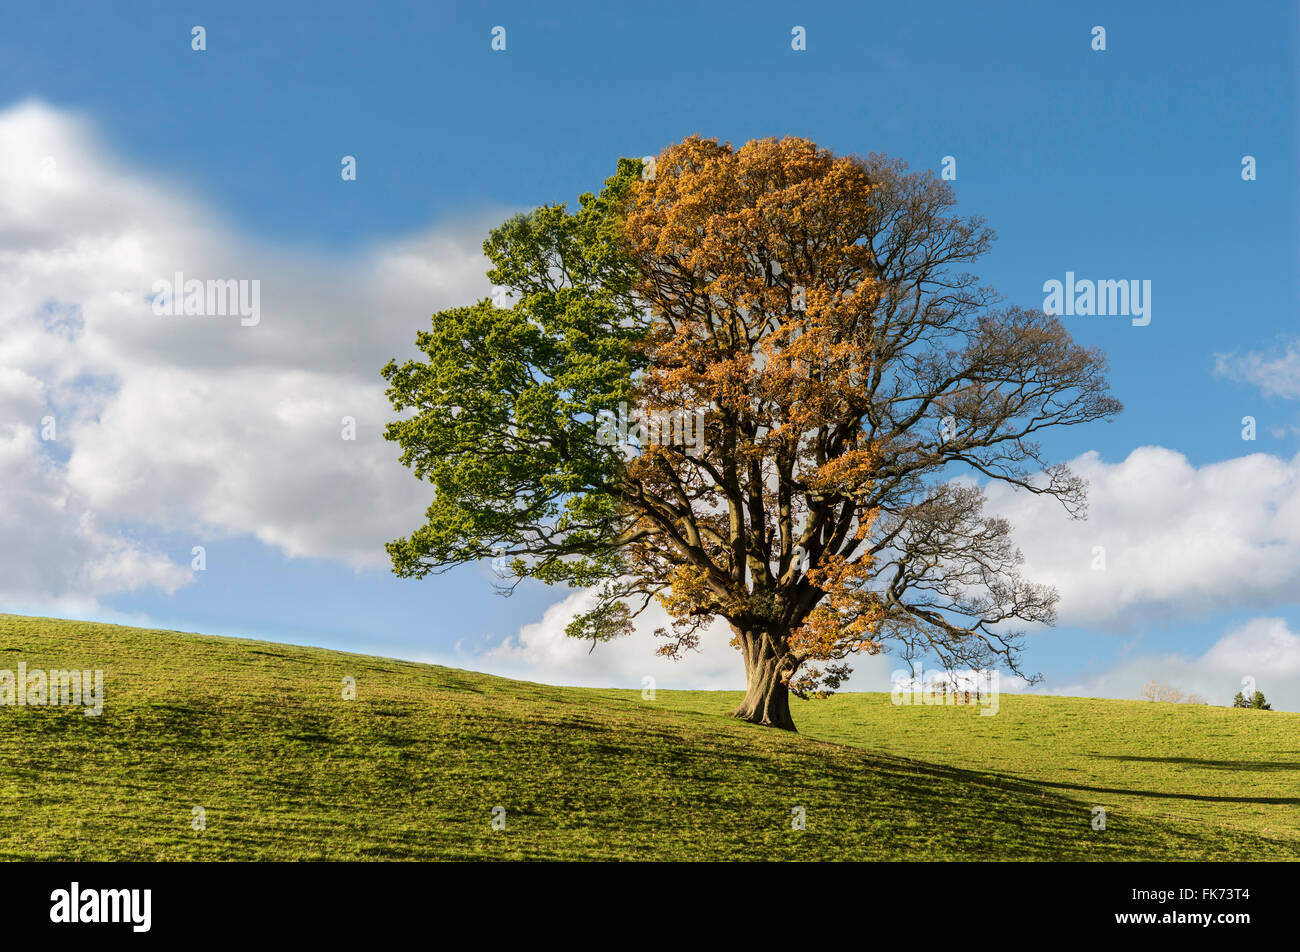 Montage of oak tree through three seasons, summer, autumn, spring showing passage of time. Tree in field against blue sky. Uk Stock Photo